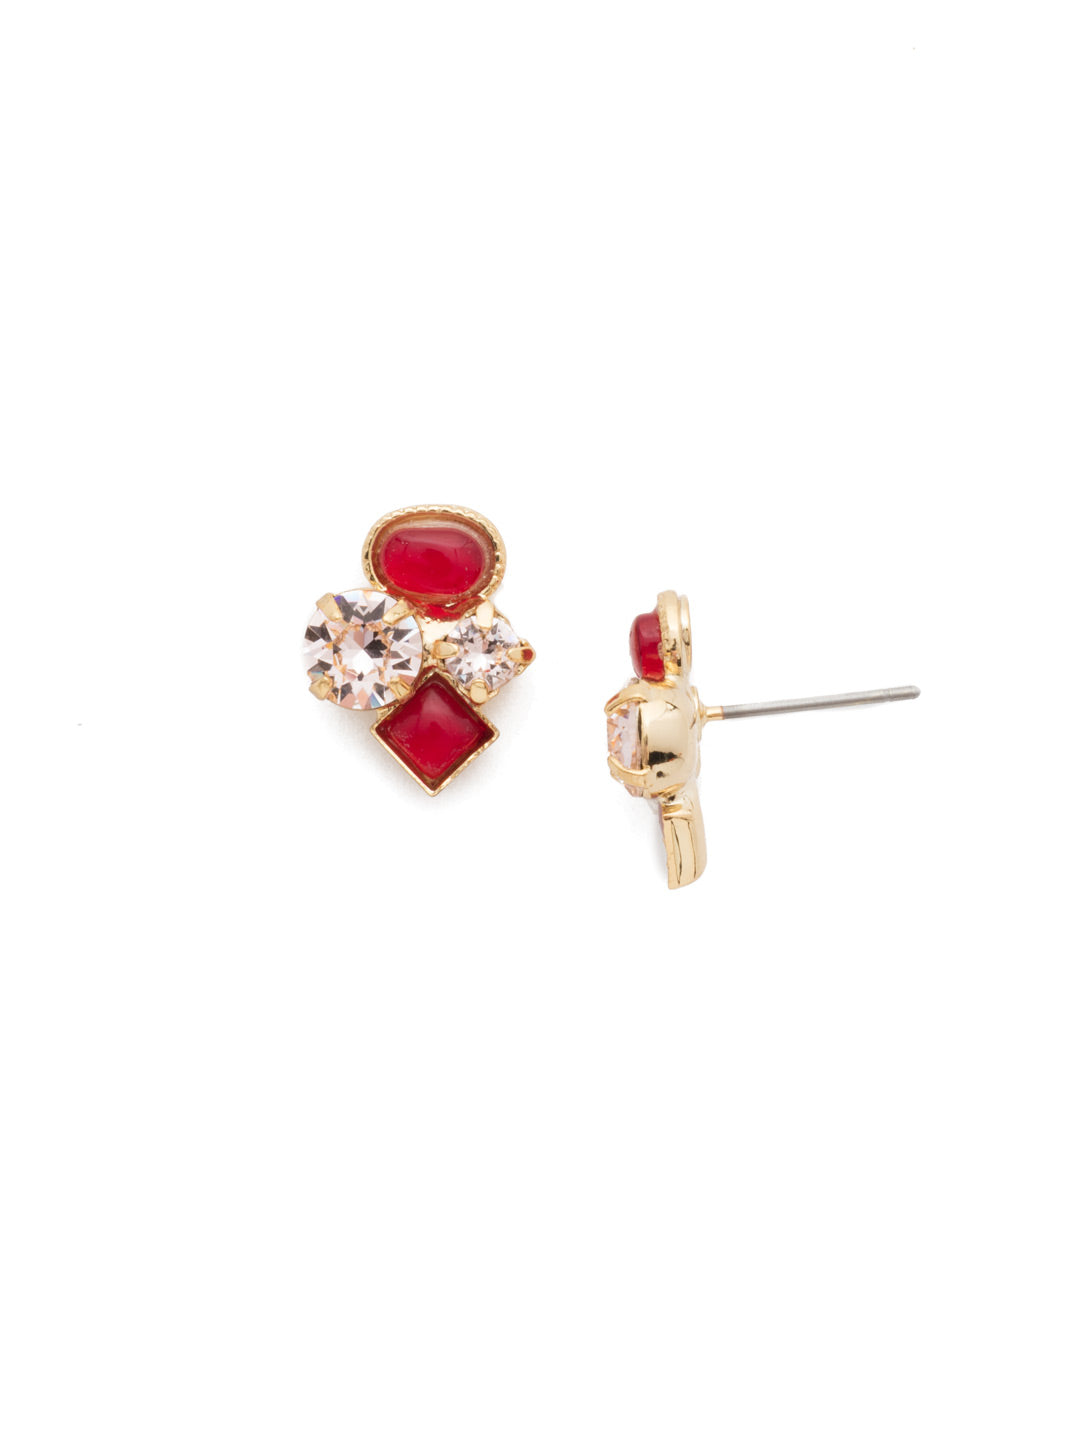 Small Cluster Stud Earring - EAT32BGSRC - Who knew that something so simple could look so spectacular? Square, round, and oval cut stones are exquisitely placed together on a post. This stud earring is sure to become one of your all time favorites! From Sorrelli's Scarlet Champagne  collection in our Bright Gold-tone finish.